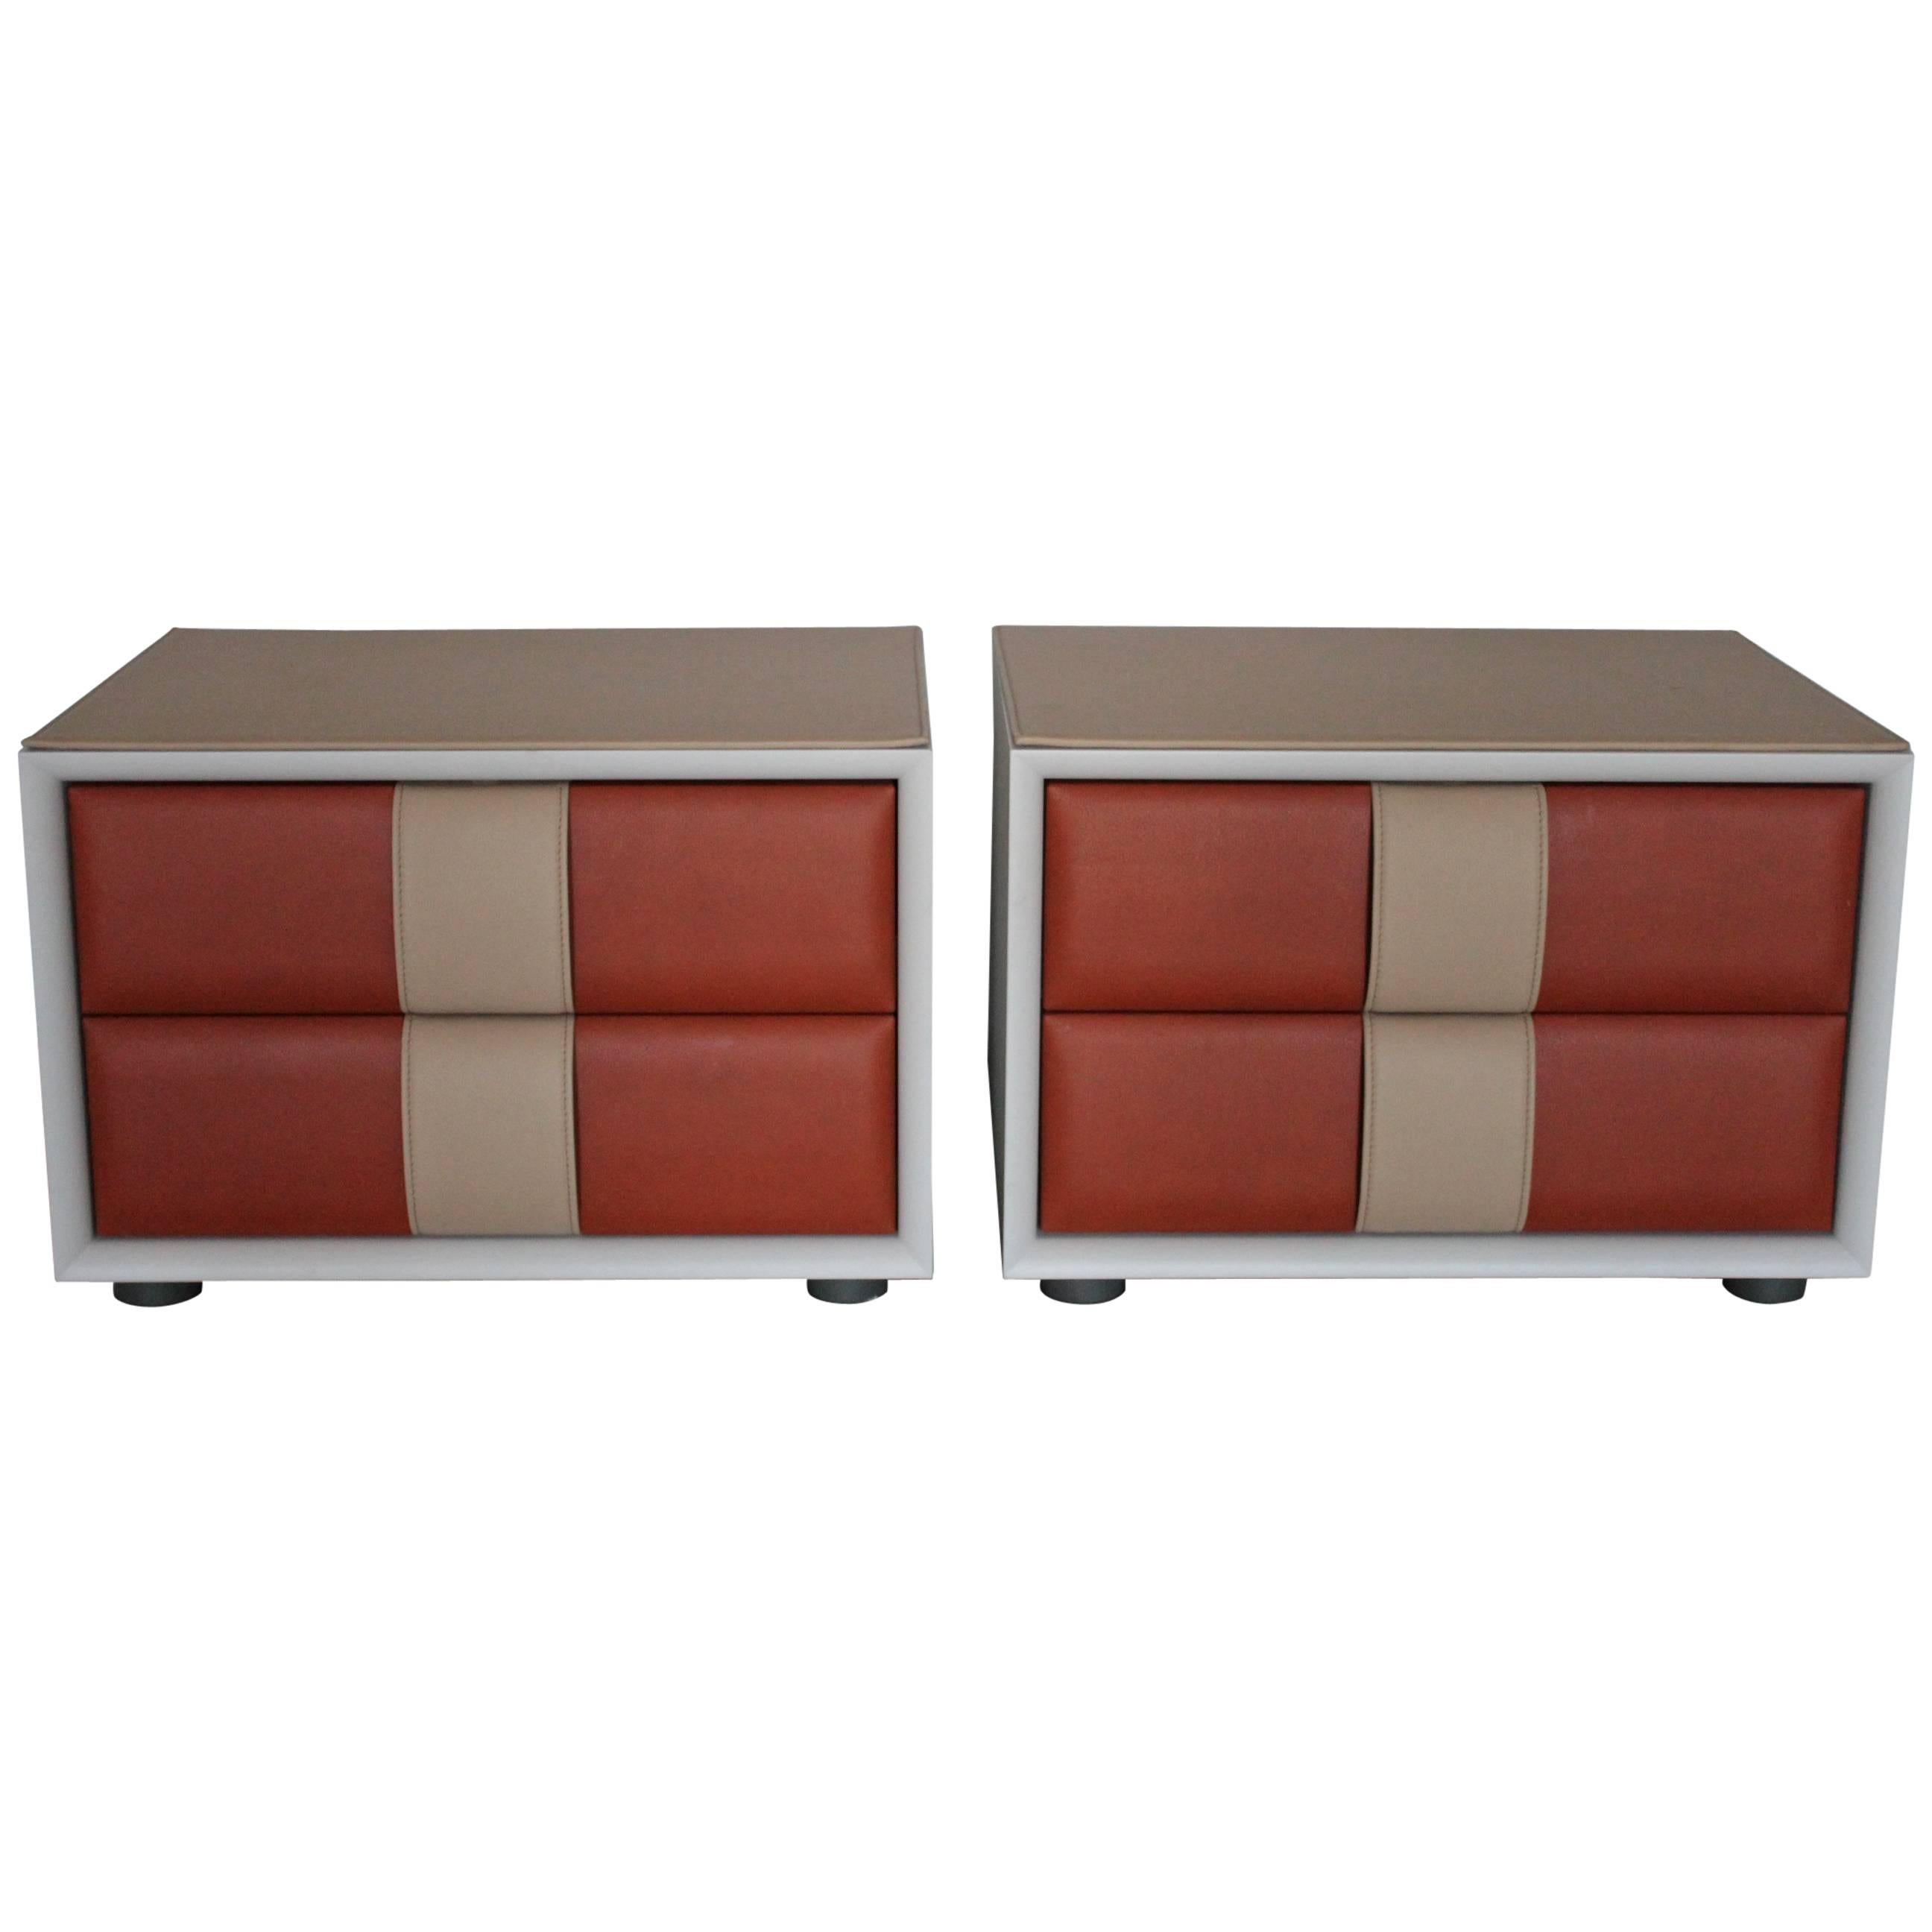 Poltrona Frau "Obi" Bed Side Bedside Tables Drawers in "Pelle" Leather